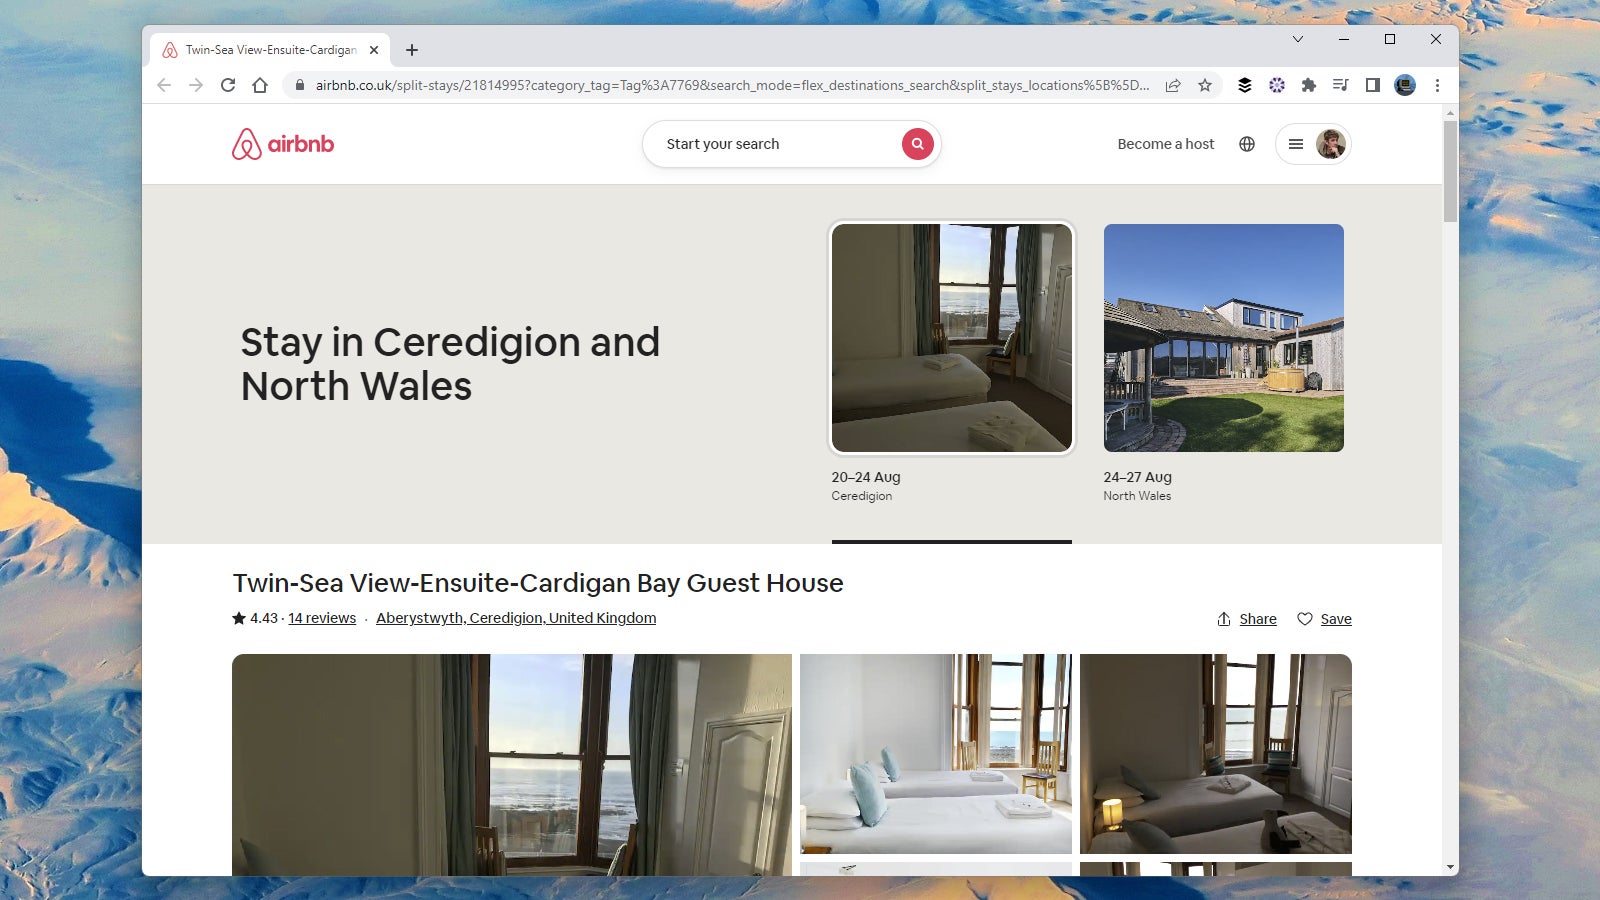 Split stays can give you more potential places to stay. (Screenshot: Airbnb)